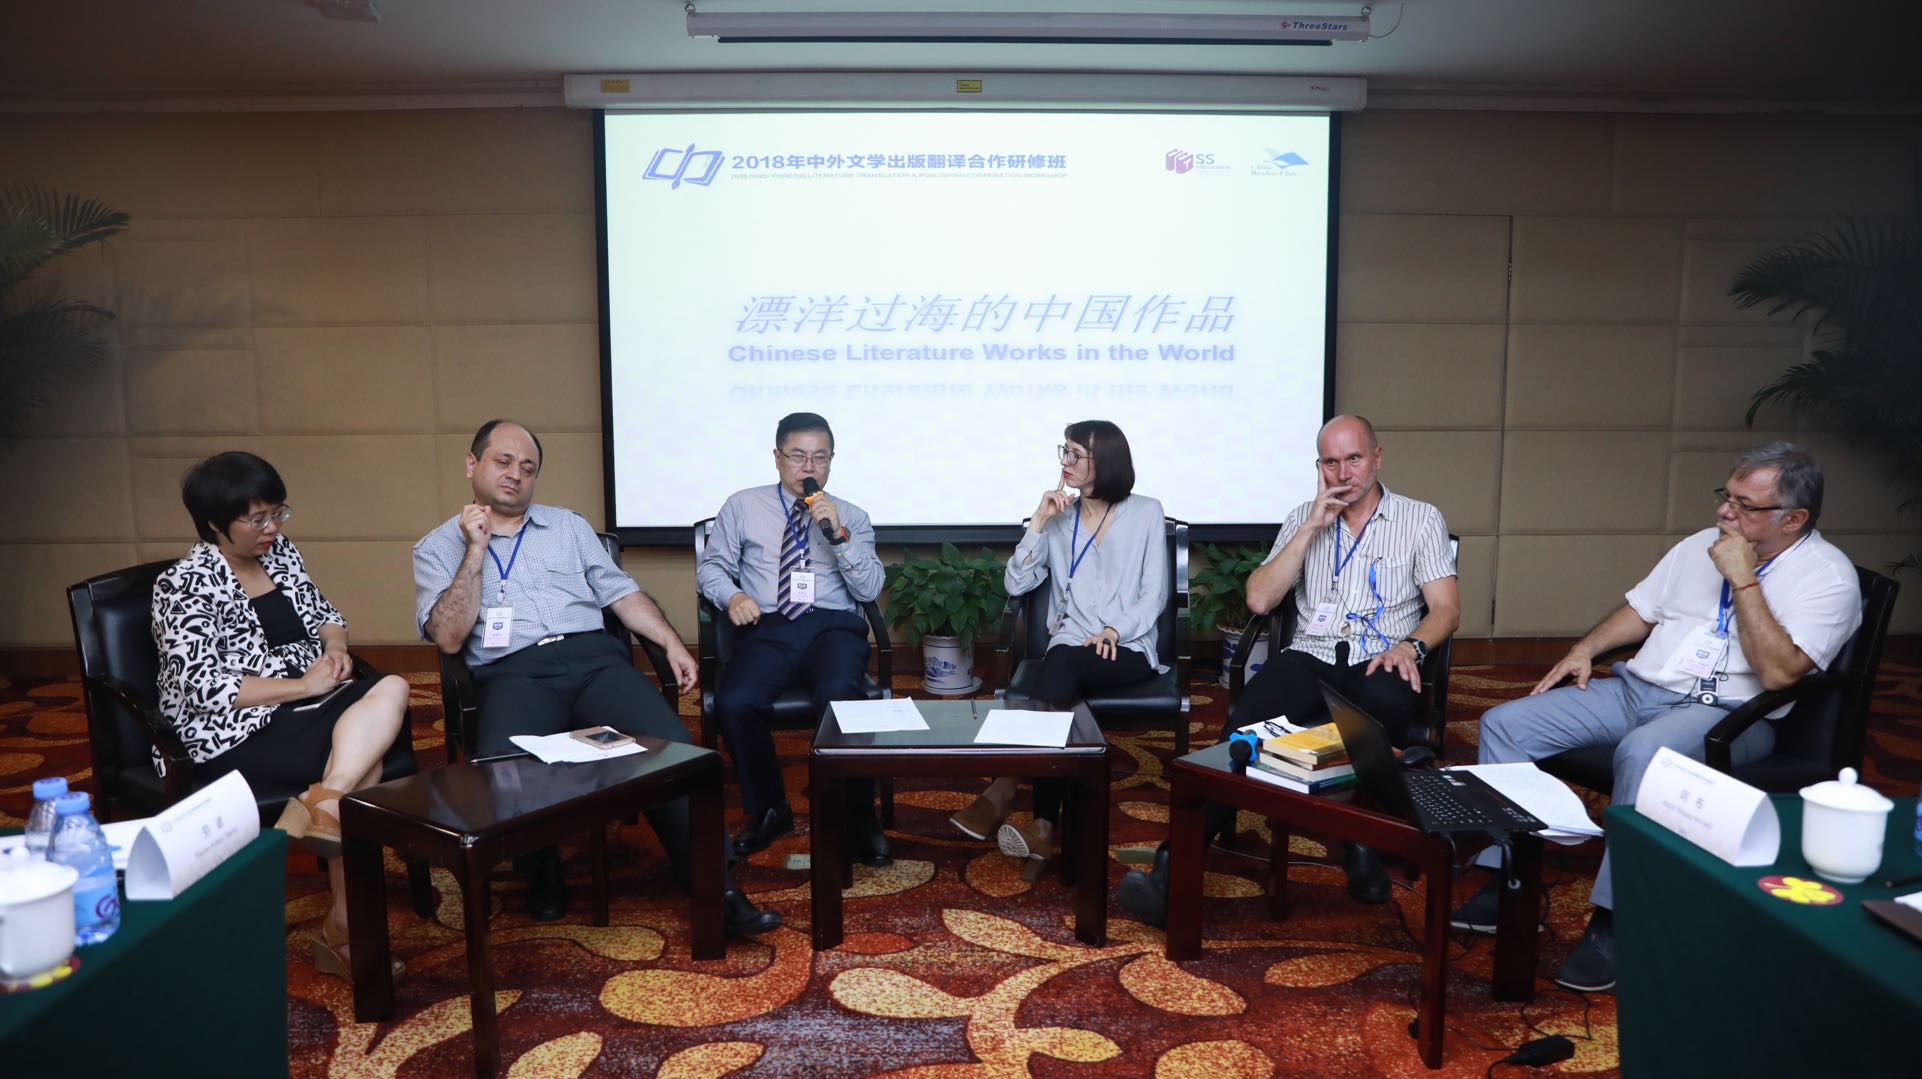 [:en]Translators and publishers discuss future cooperation at the conference in Beijing[:]